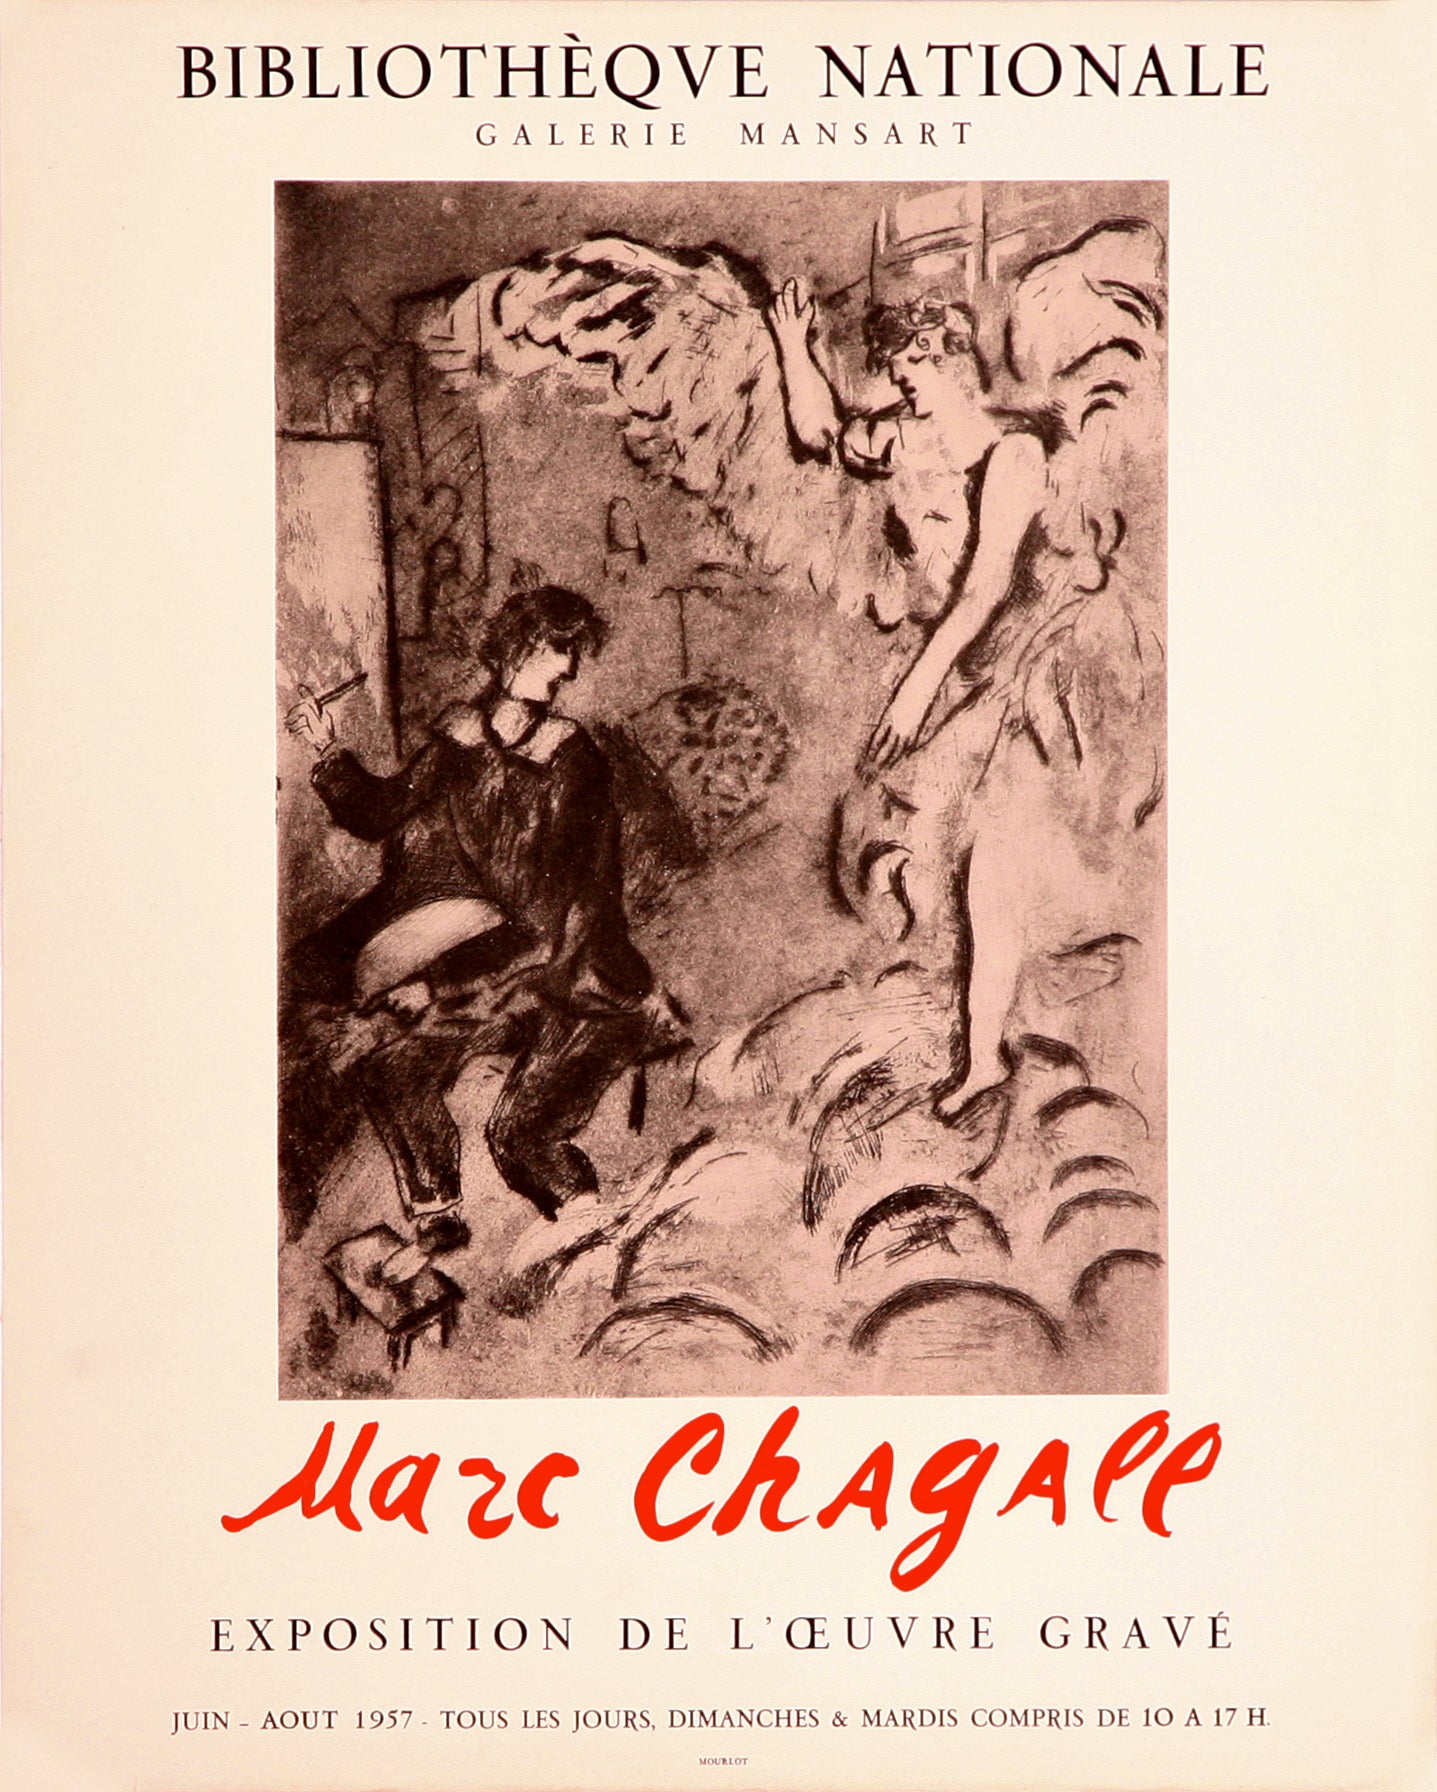 L'Apparition - Bibliotheque Nationale (after) Marc Chagall, 1957 - Mourlot Editions - Fine_Art - Poster - Lithograph - Wall Art - Vintage - Prints - Original